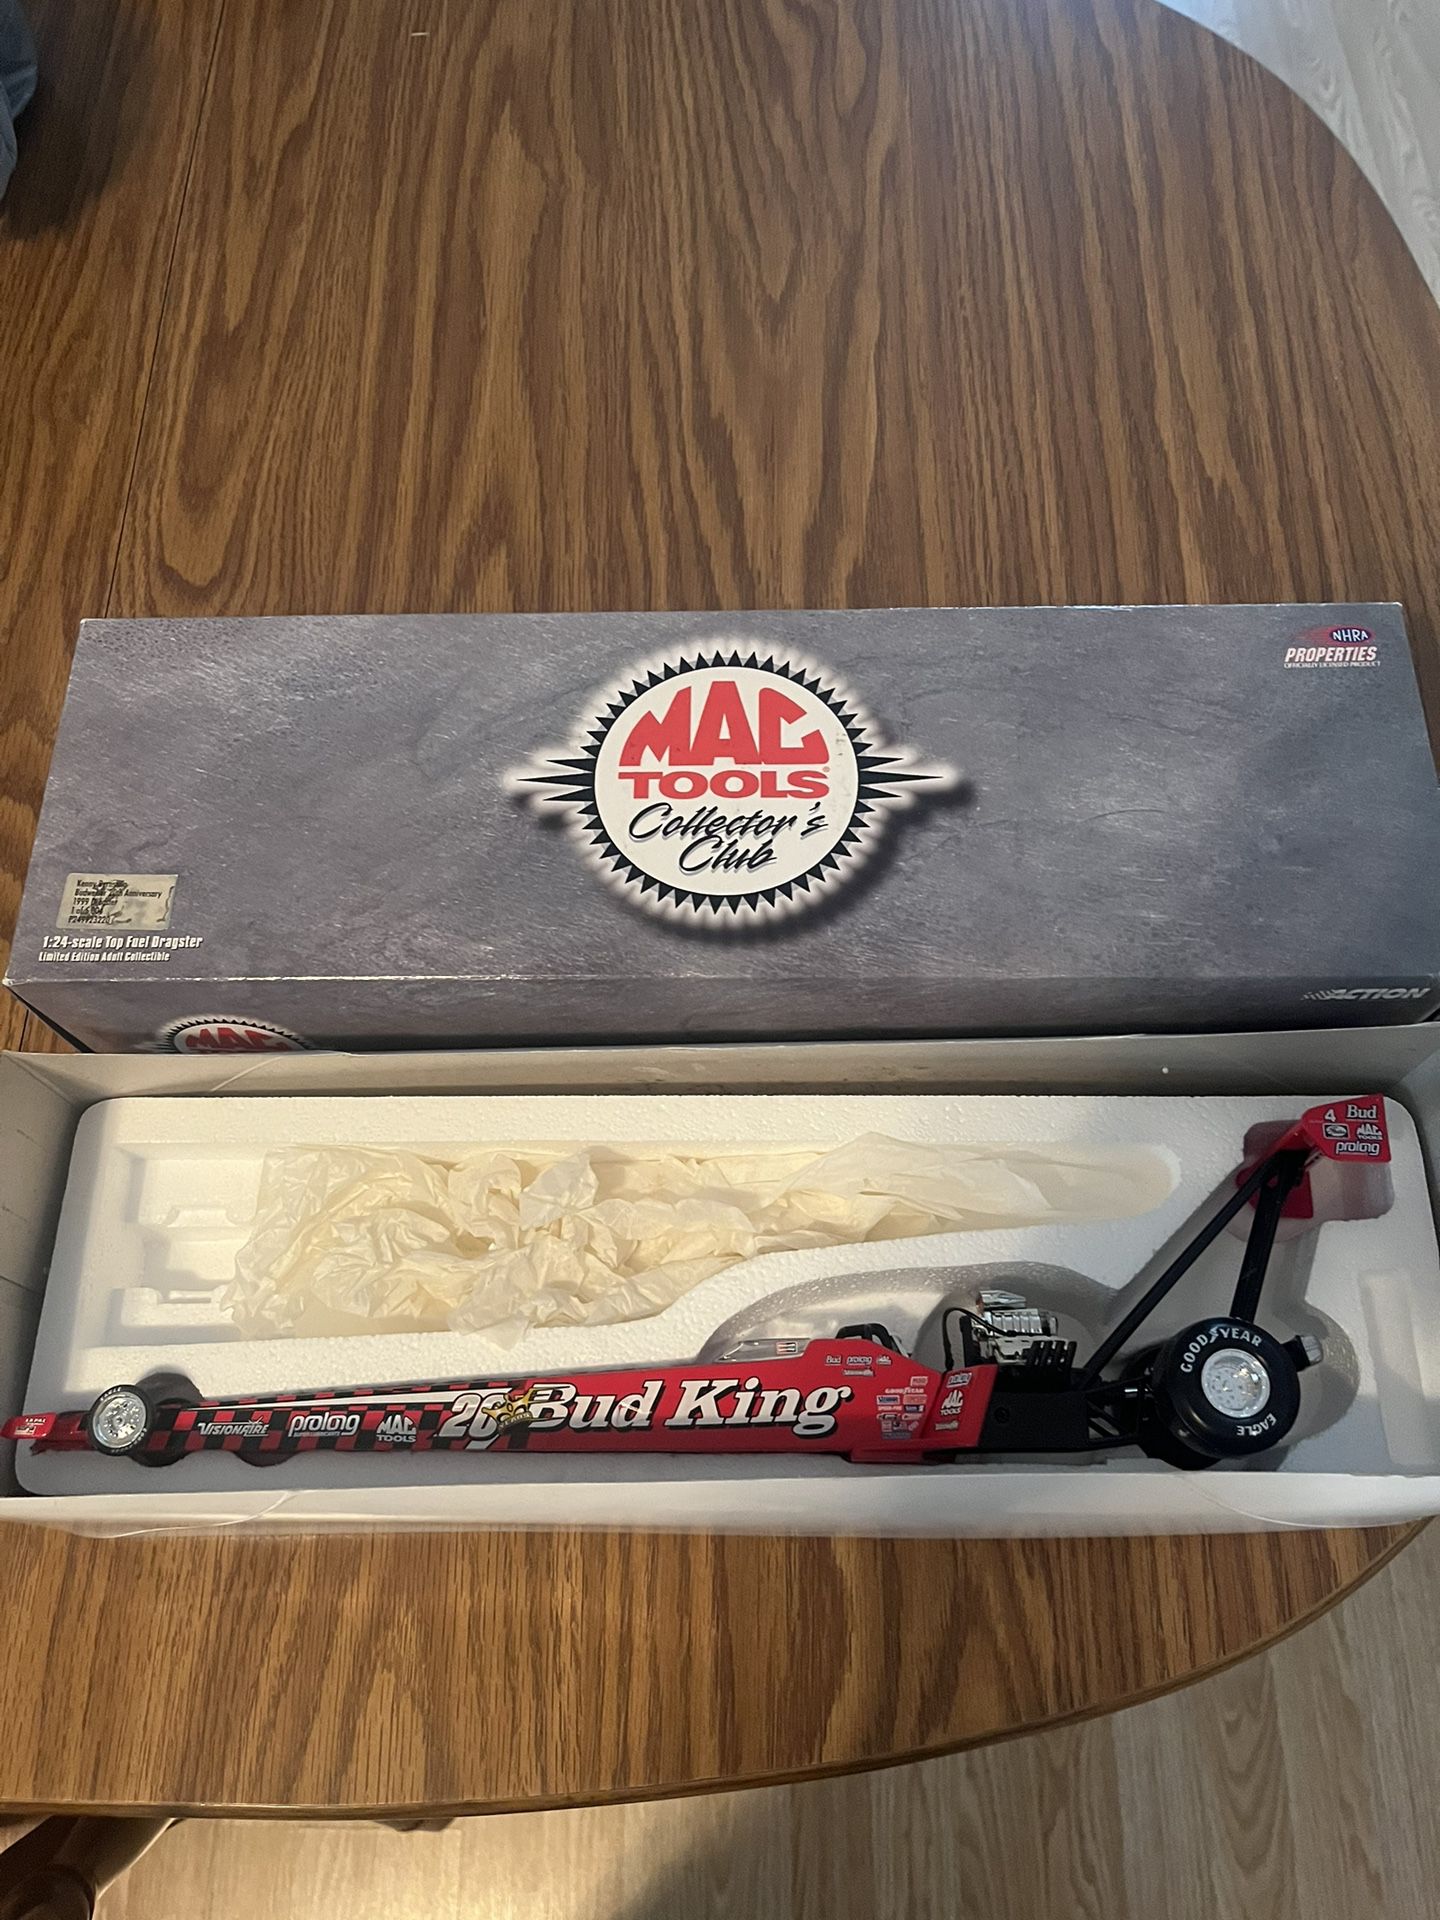 Action Mac Tools 1/24 1997 Dragster Kenny Bernstein Bud King Top Fuel Dragster 1 Of 5,004